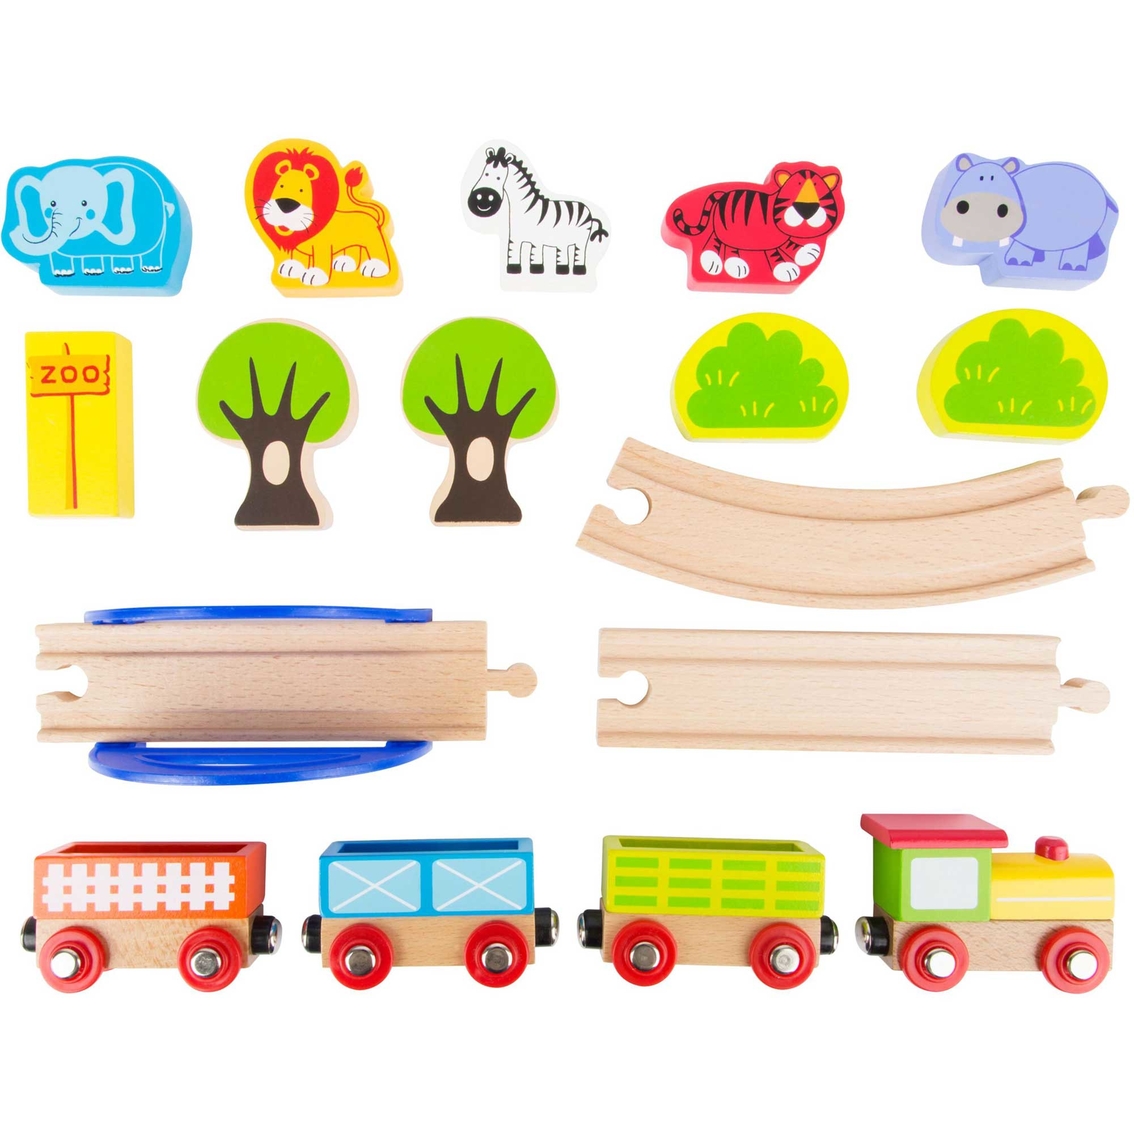 Small Foot Wooden Toys The Zoo Train Railway Playset - Image 3 of 3